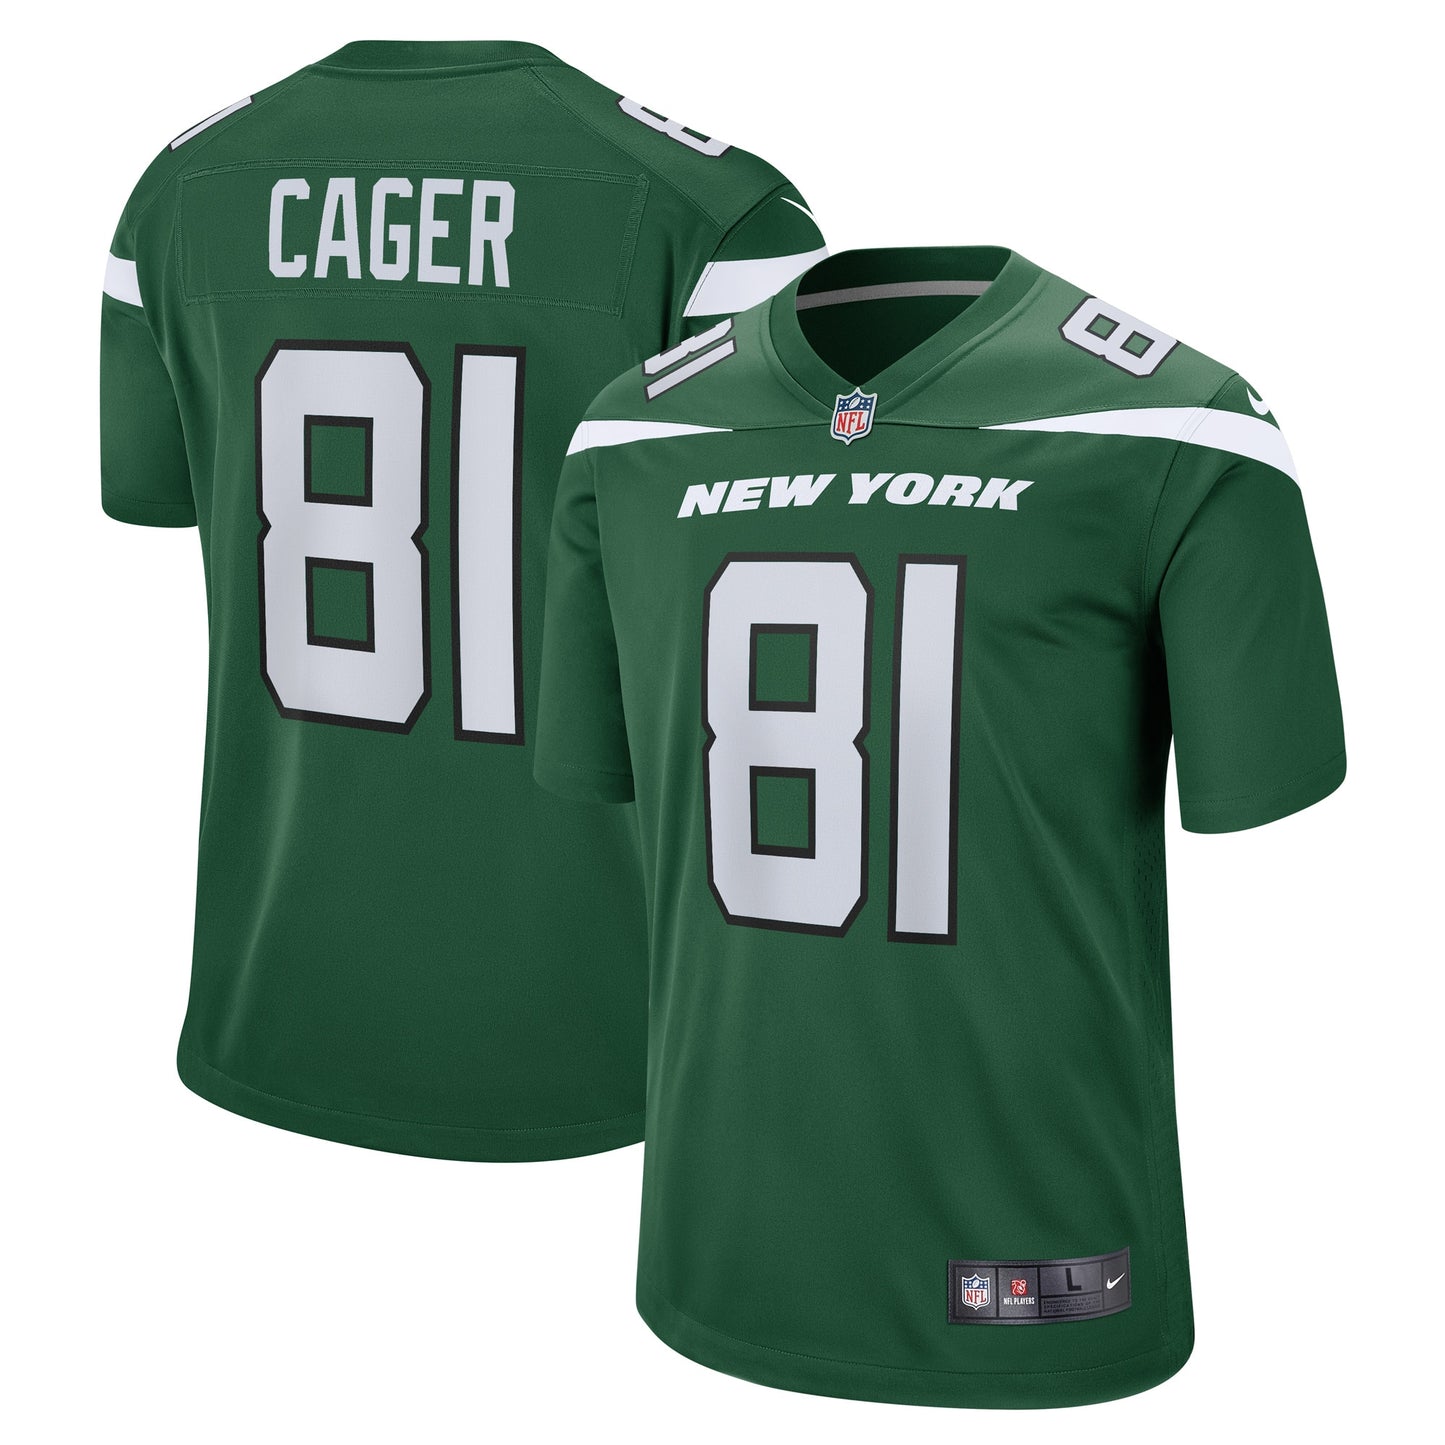 Lawrence Cager New York Jets Nike Team Game Player Jersey - Gotham Green